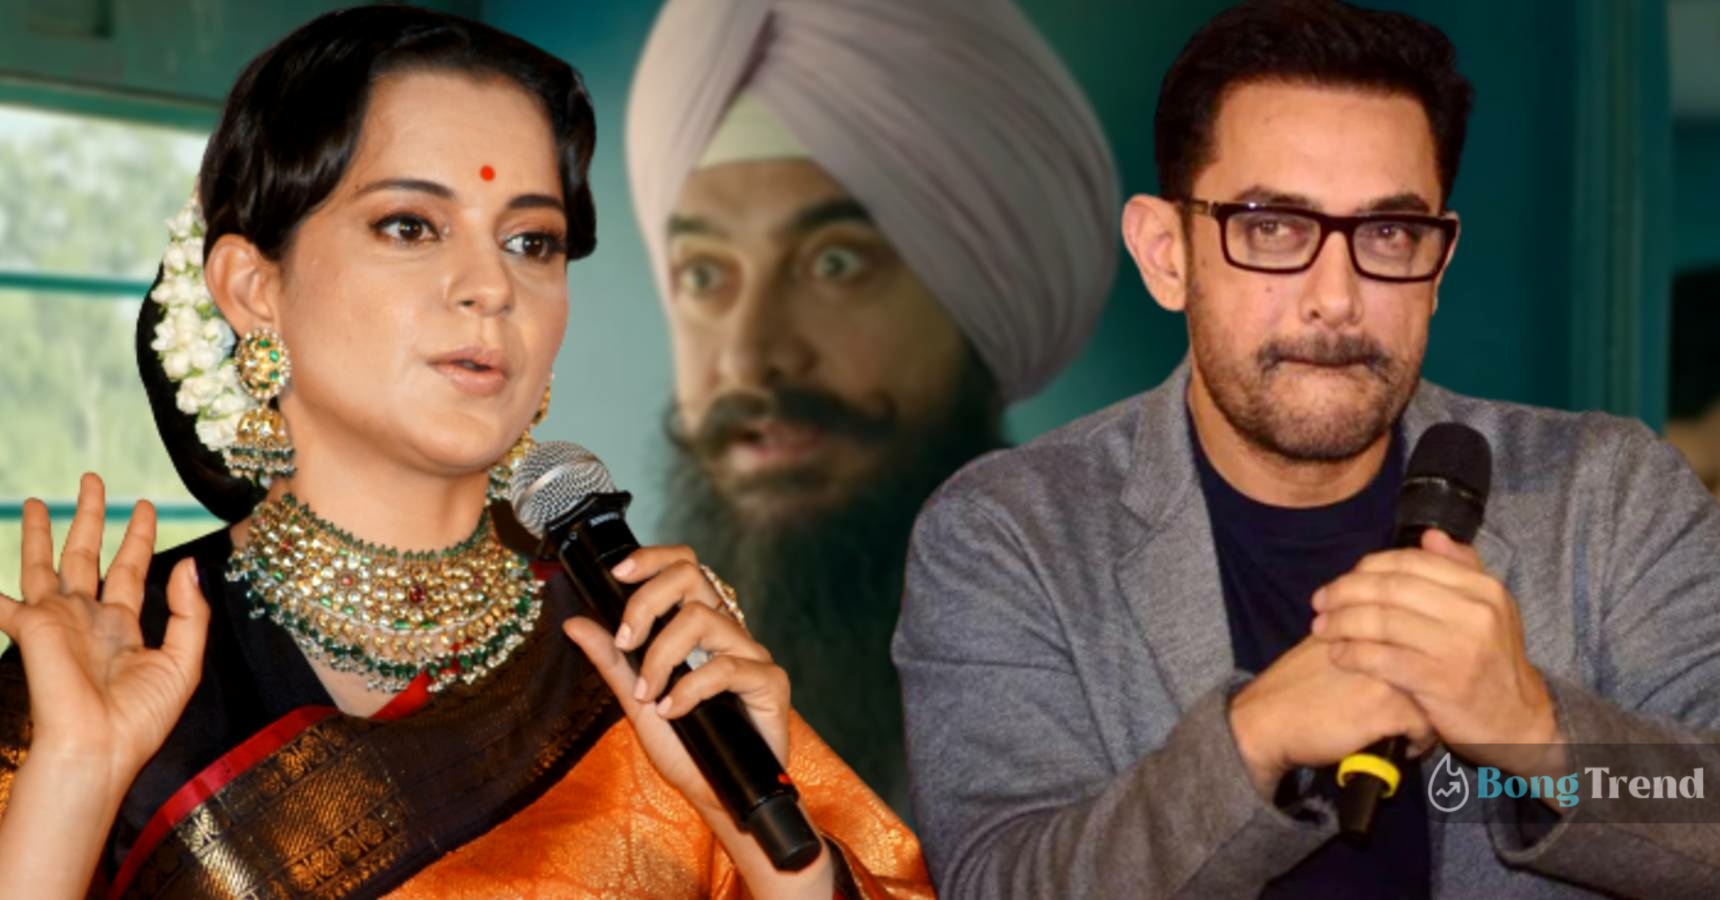 Kangana Ranaut takes a dig at Bollywood superstar Aamir Khan for charging 200 crores after Laal Singh Chaddha’s failure